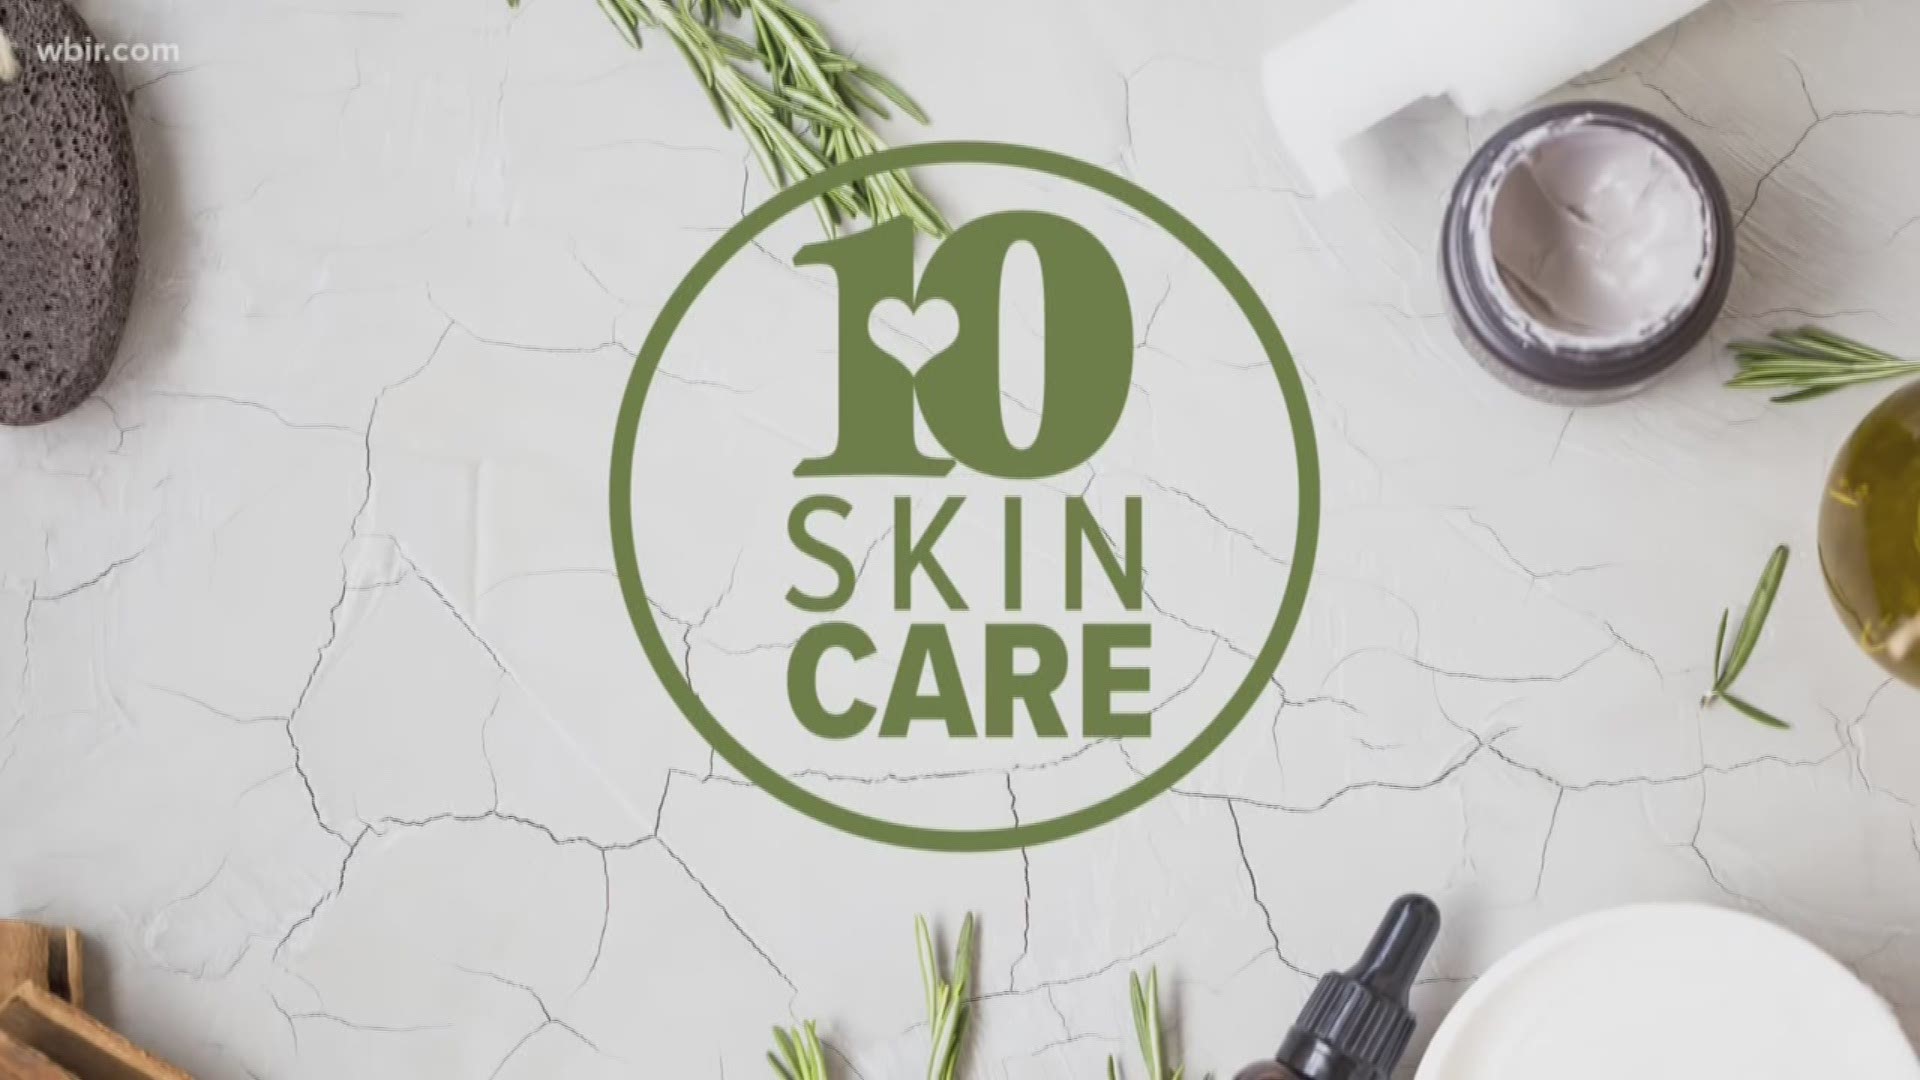 In our 10 Skincare series, we are looking at the hottest skin trends and one is certainly Botox. It's been trendy for a long time, but those getting Botox are getting younger and younger with many starting in their 20s.